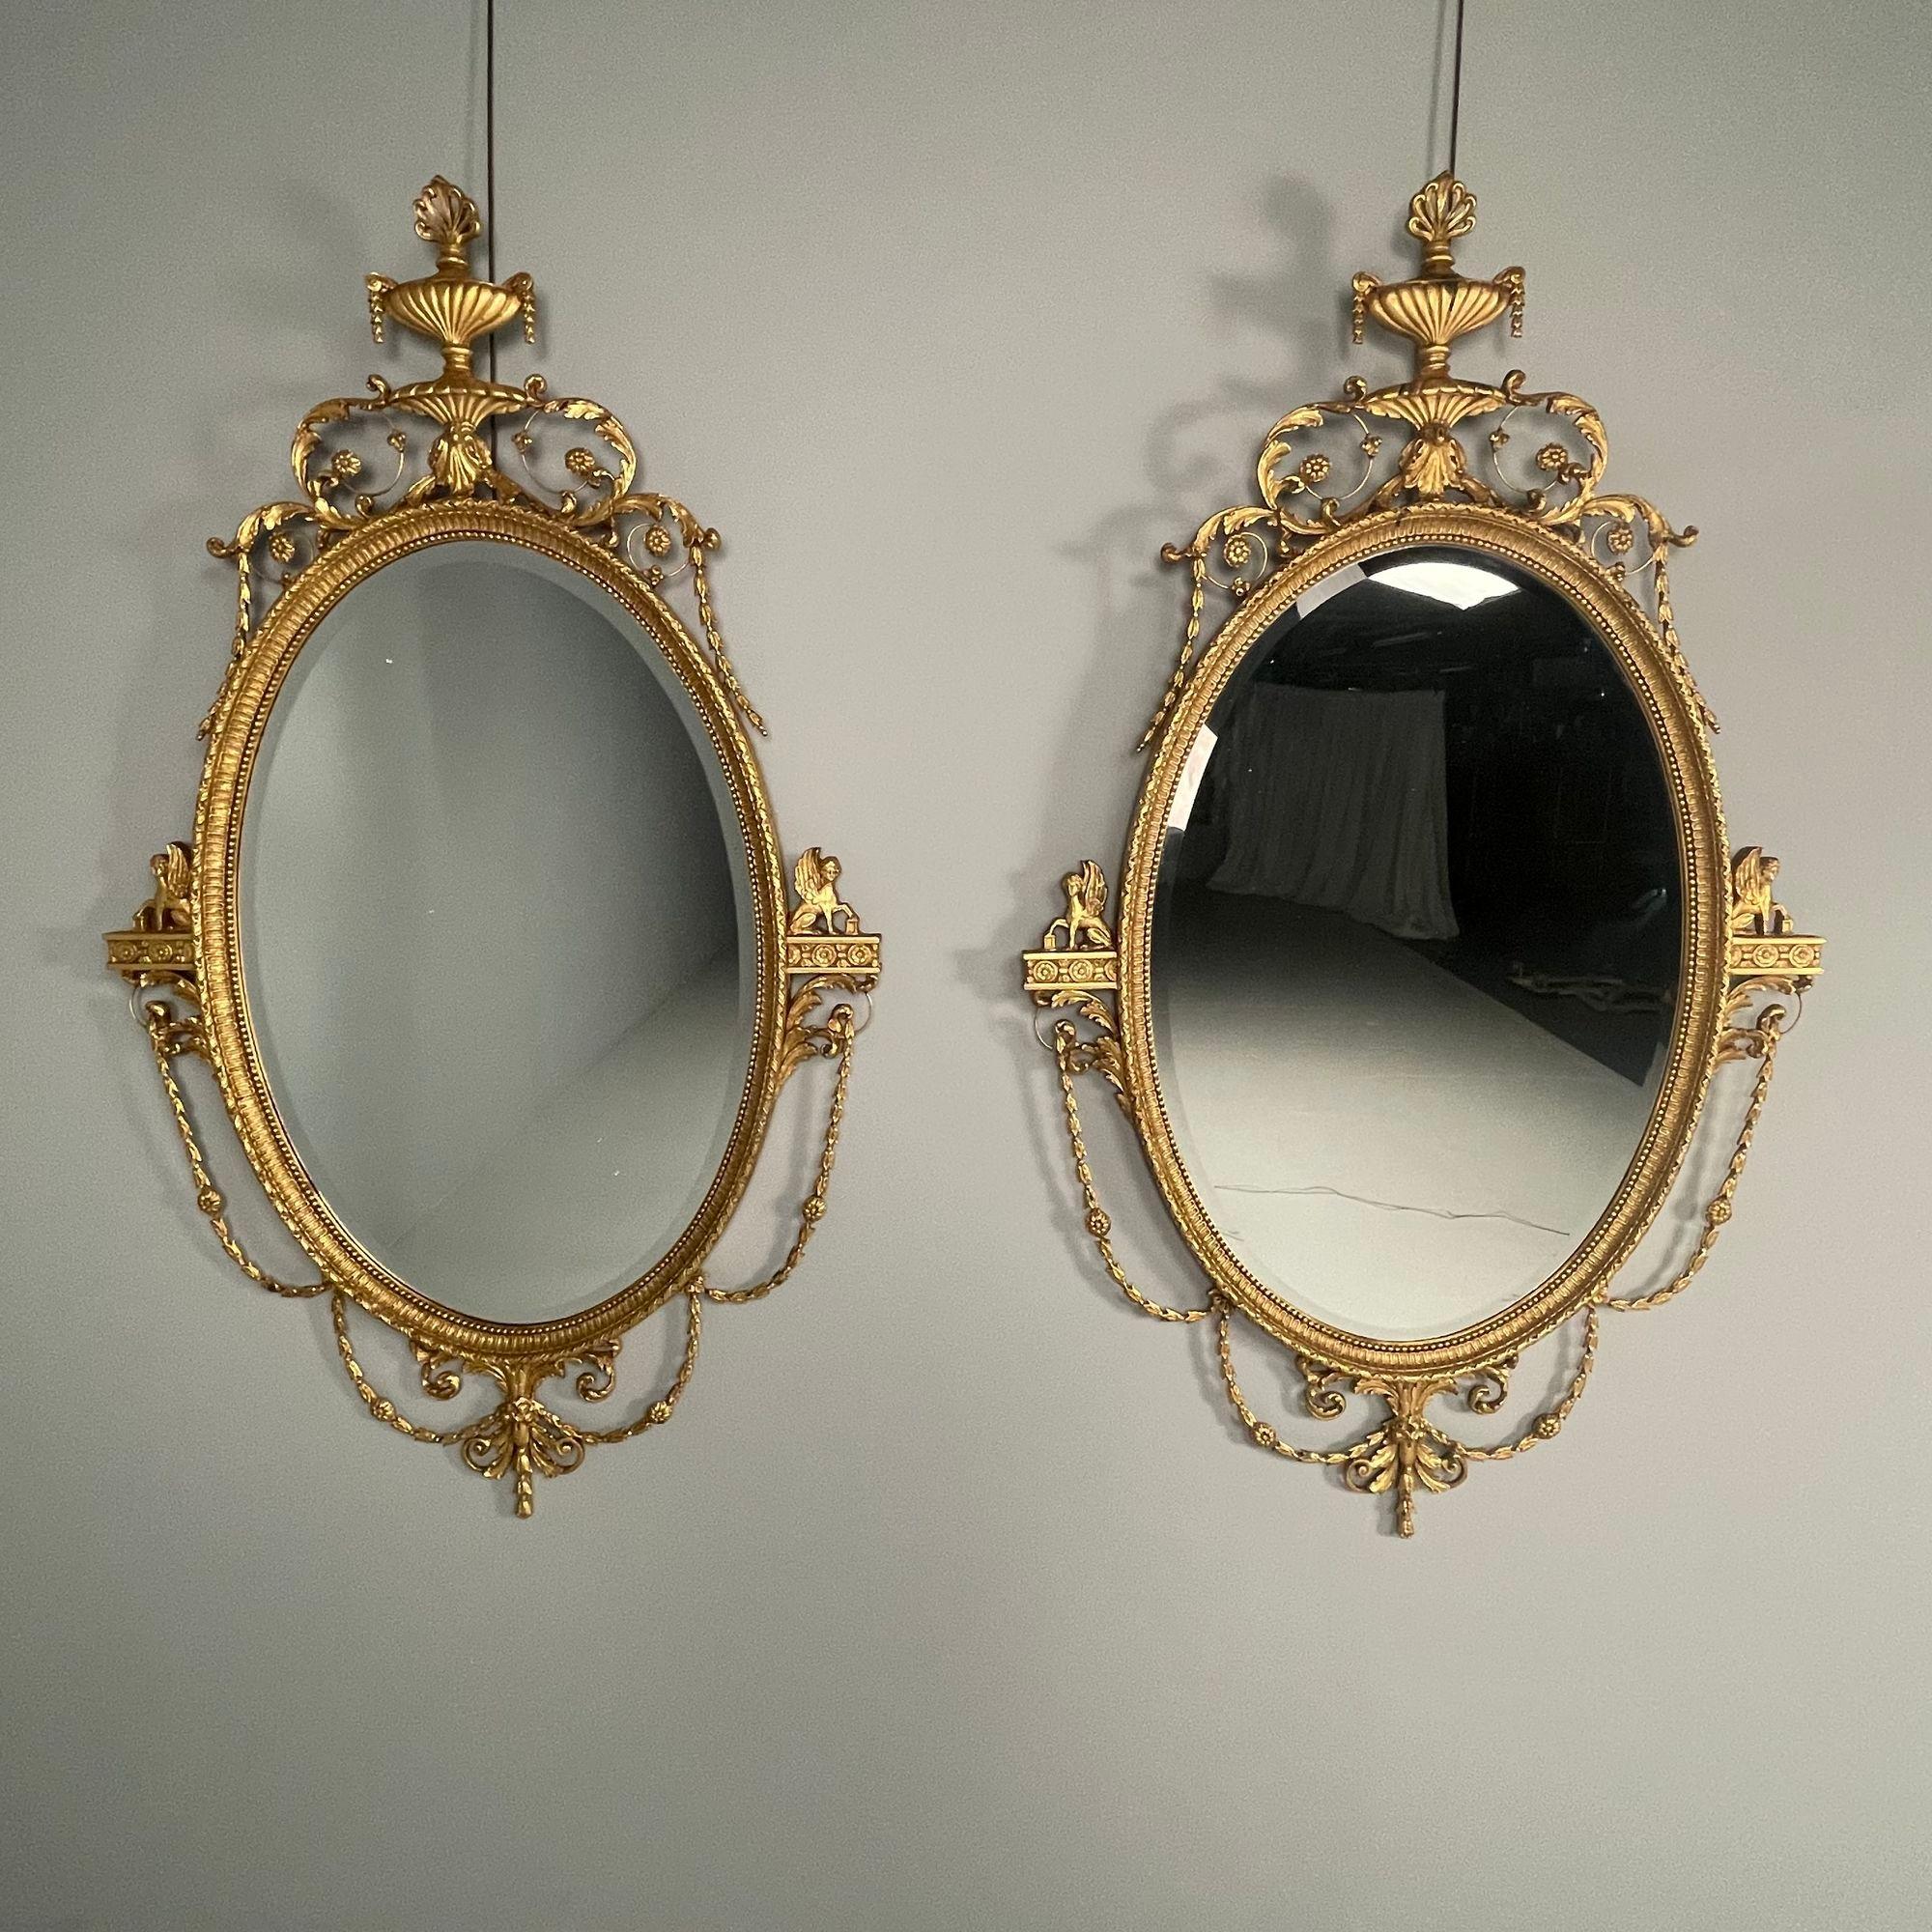 Pair of English Regency Style Gilt Wood Oval Mirror, Wall, Console, Over Mantle

Each oval center clean mirror is elaborately decorated with swags, urns and griffins. Very fine condition.

H 69 W 40.5 D 2.25 Excellent Condition

LHX